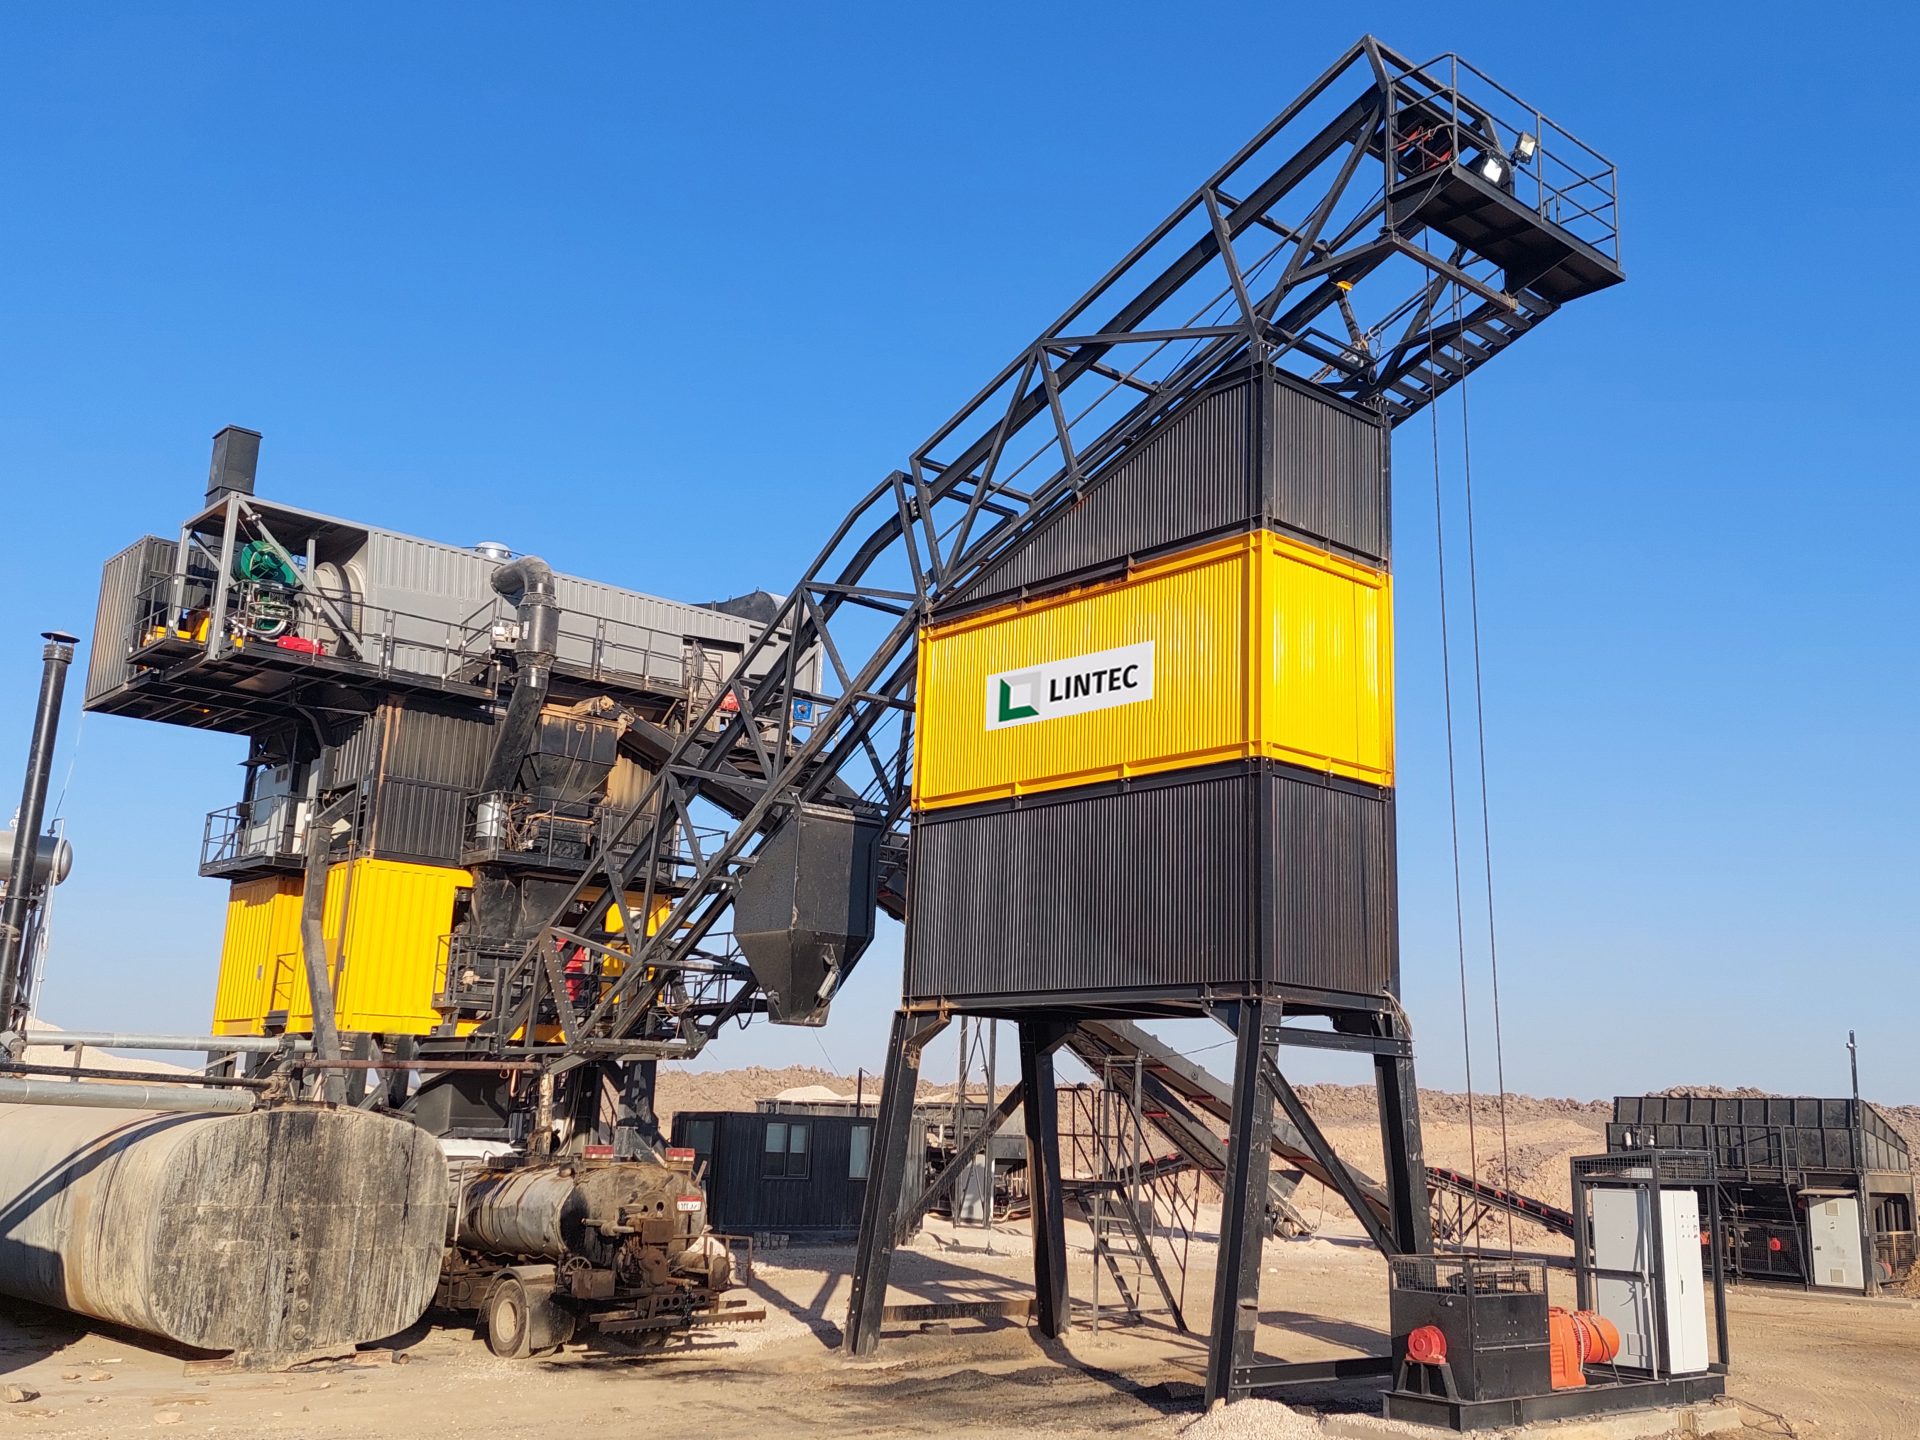 Egypt’s Rsquared Construction chooses Lintec CSD2500B for major highway project 